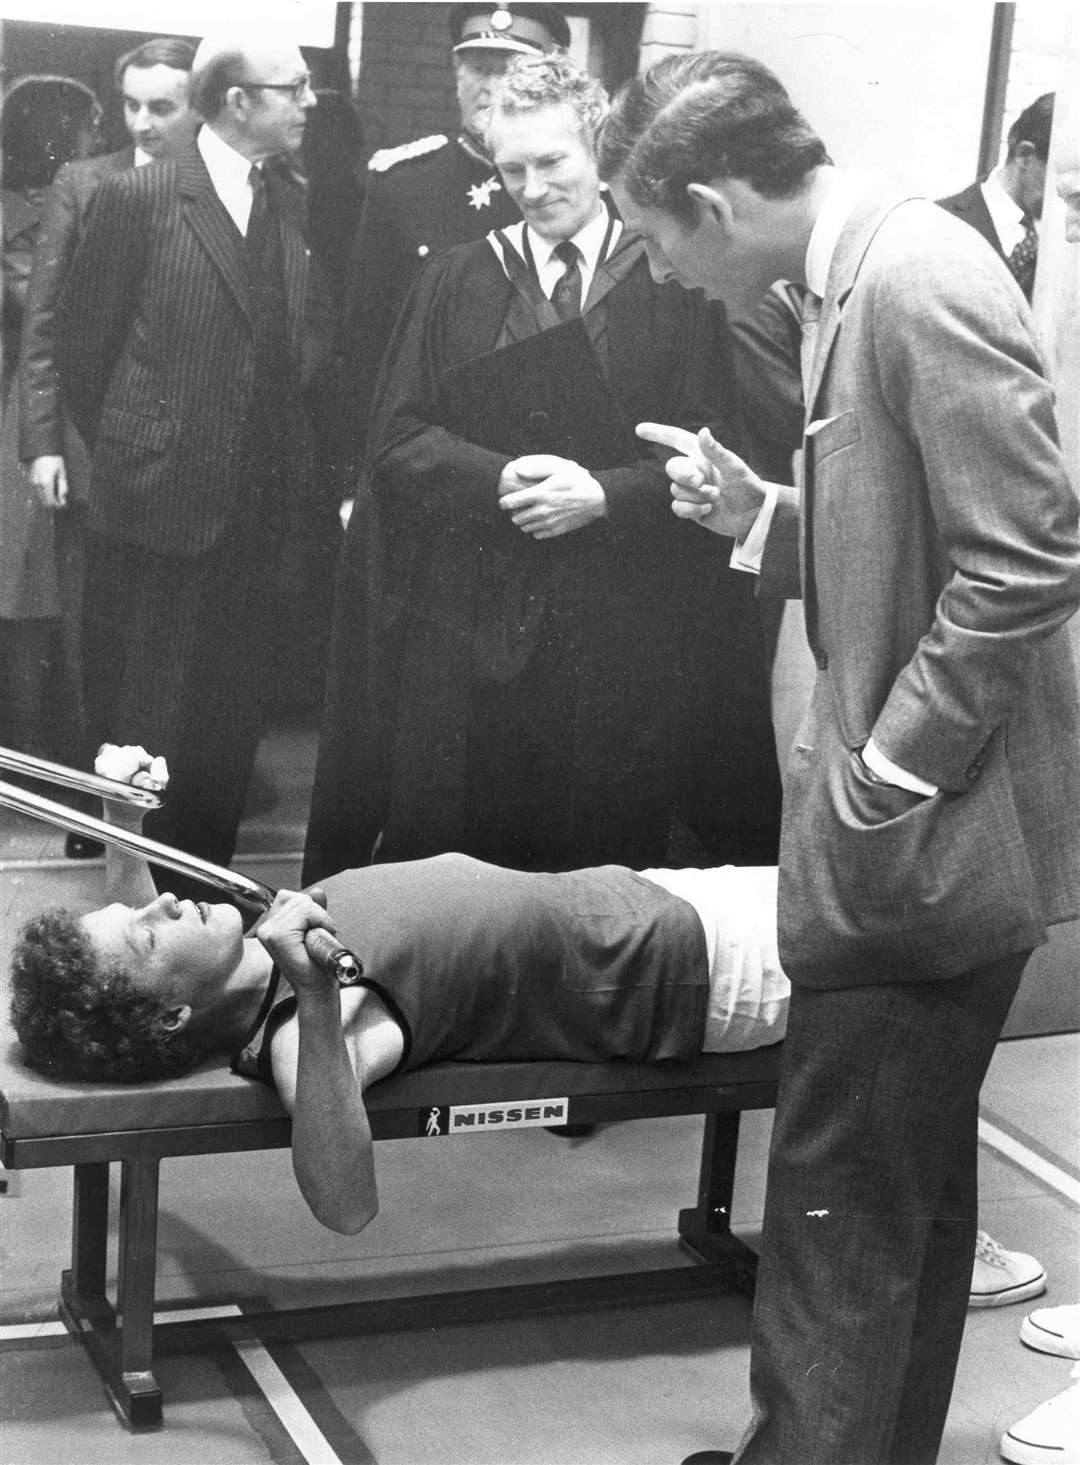 The Prince of Wales opened the £500,000 Marley Sports Centre at Sevenoaks School in April 1977 and had a few words of advice for Michael Robinson, 16, who was demonstrating equipment in the gym